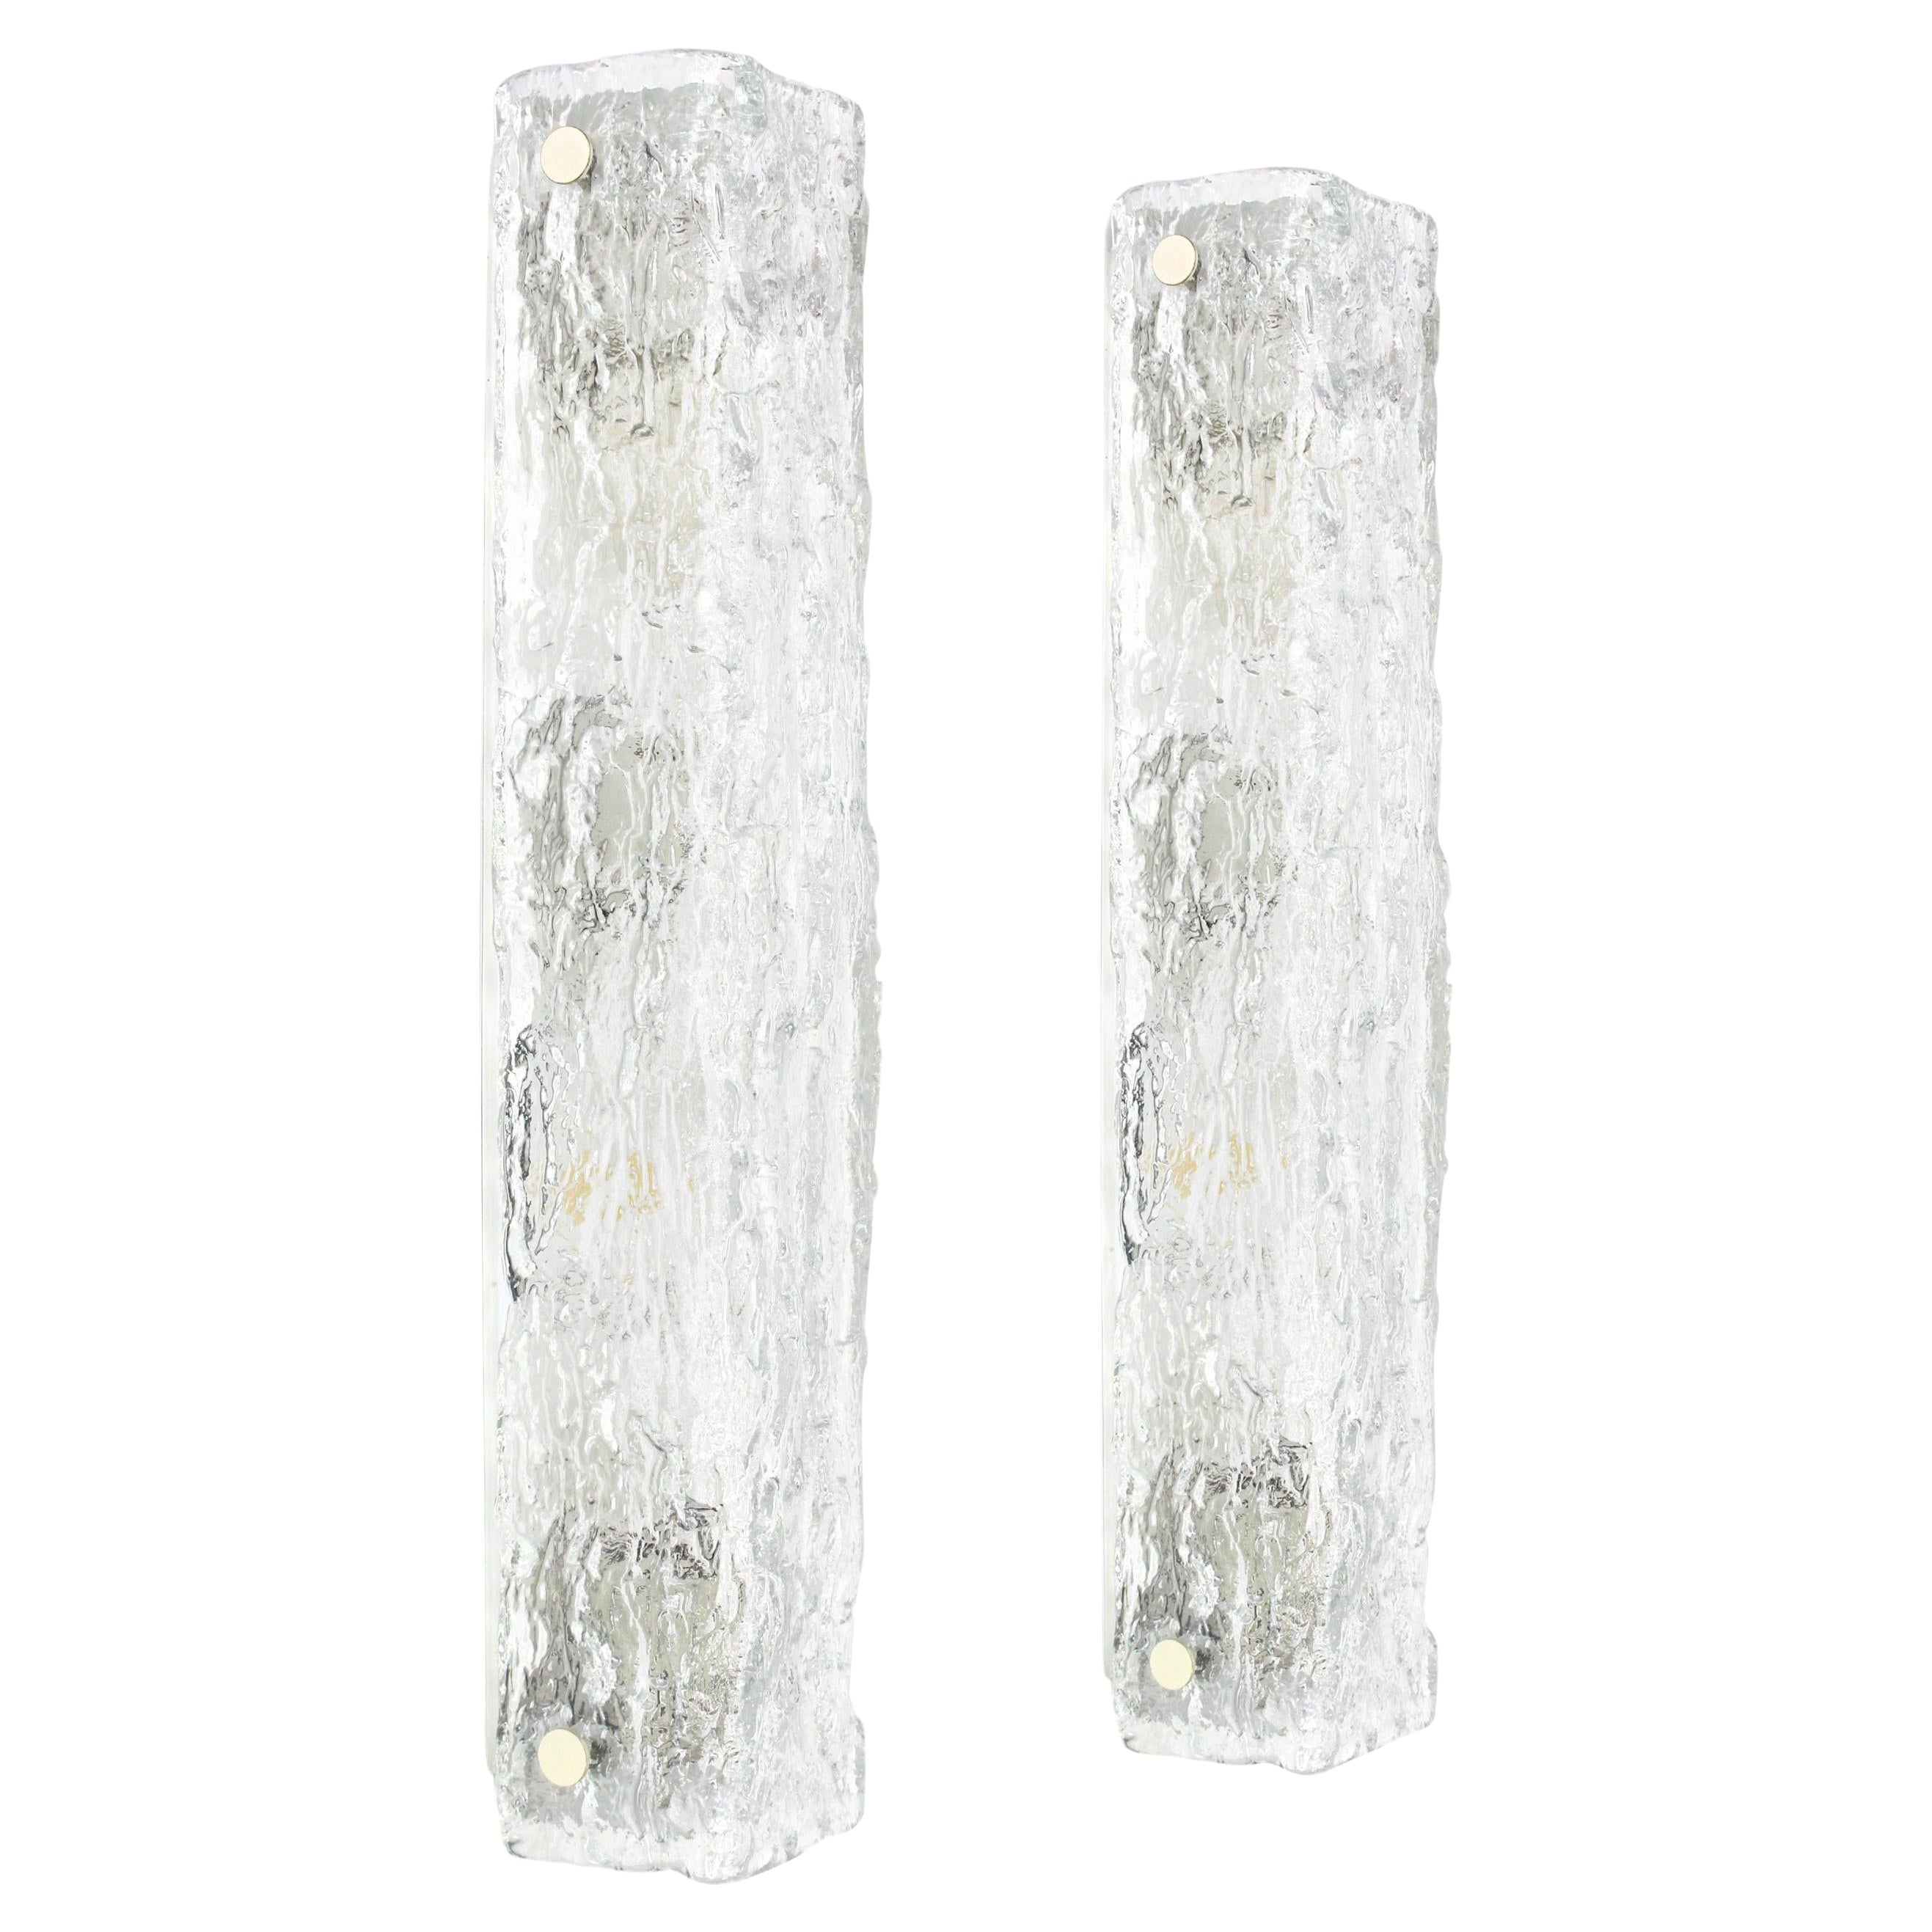 1 of 4 -Set of 2 Large Murano Ice Glass Vanity Sconces by Kaiser, Germany, 1970s